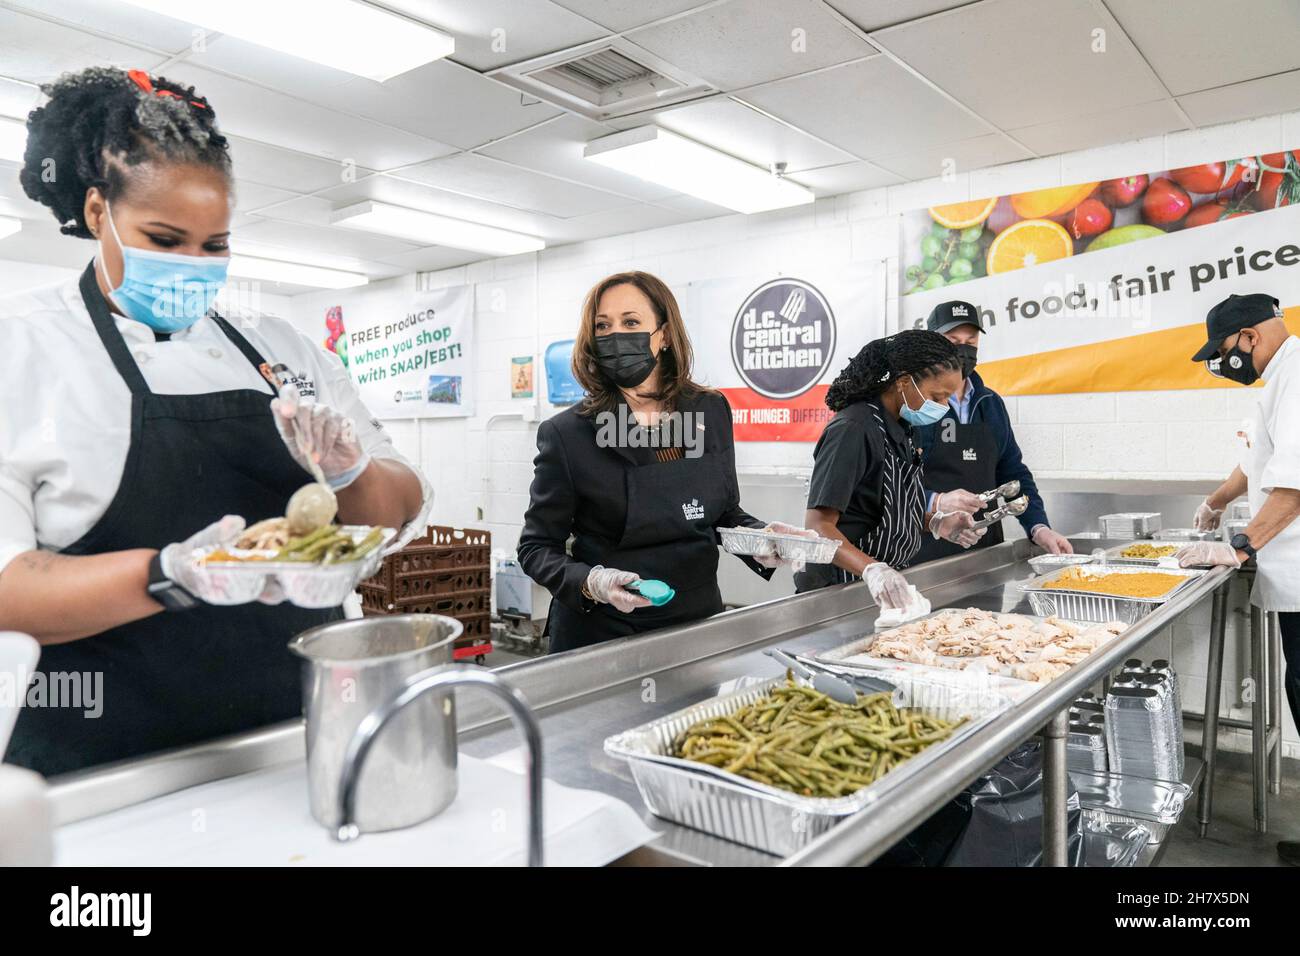 Washington, United States Of America. 25th Nov, 2021. Washington, United States of America. 25 November, 2021. U.S Vice President Kamala Harris, center, volunteers assembling Thanksgiving meal kits at DC Central Kitchen November 24, 2021 in Washington, DC DC Central Kitchen is a nonprofit that combats hunger and poverty through culinary job training. Credit: Lawrence Jackson/White House Photo/Alamy Live News Stock Photo